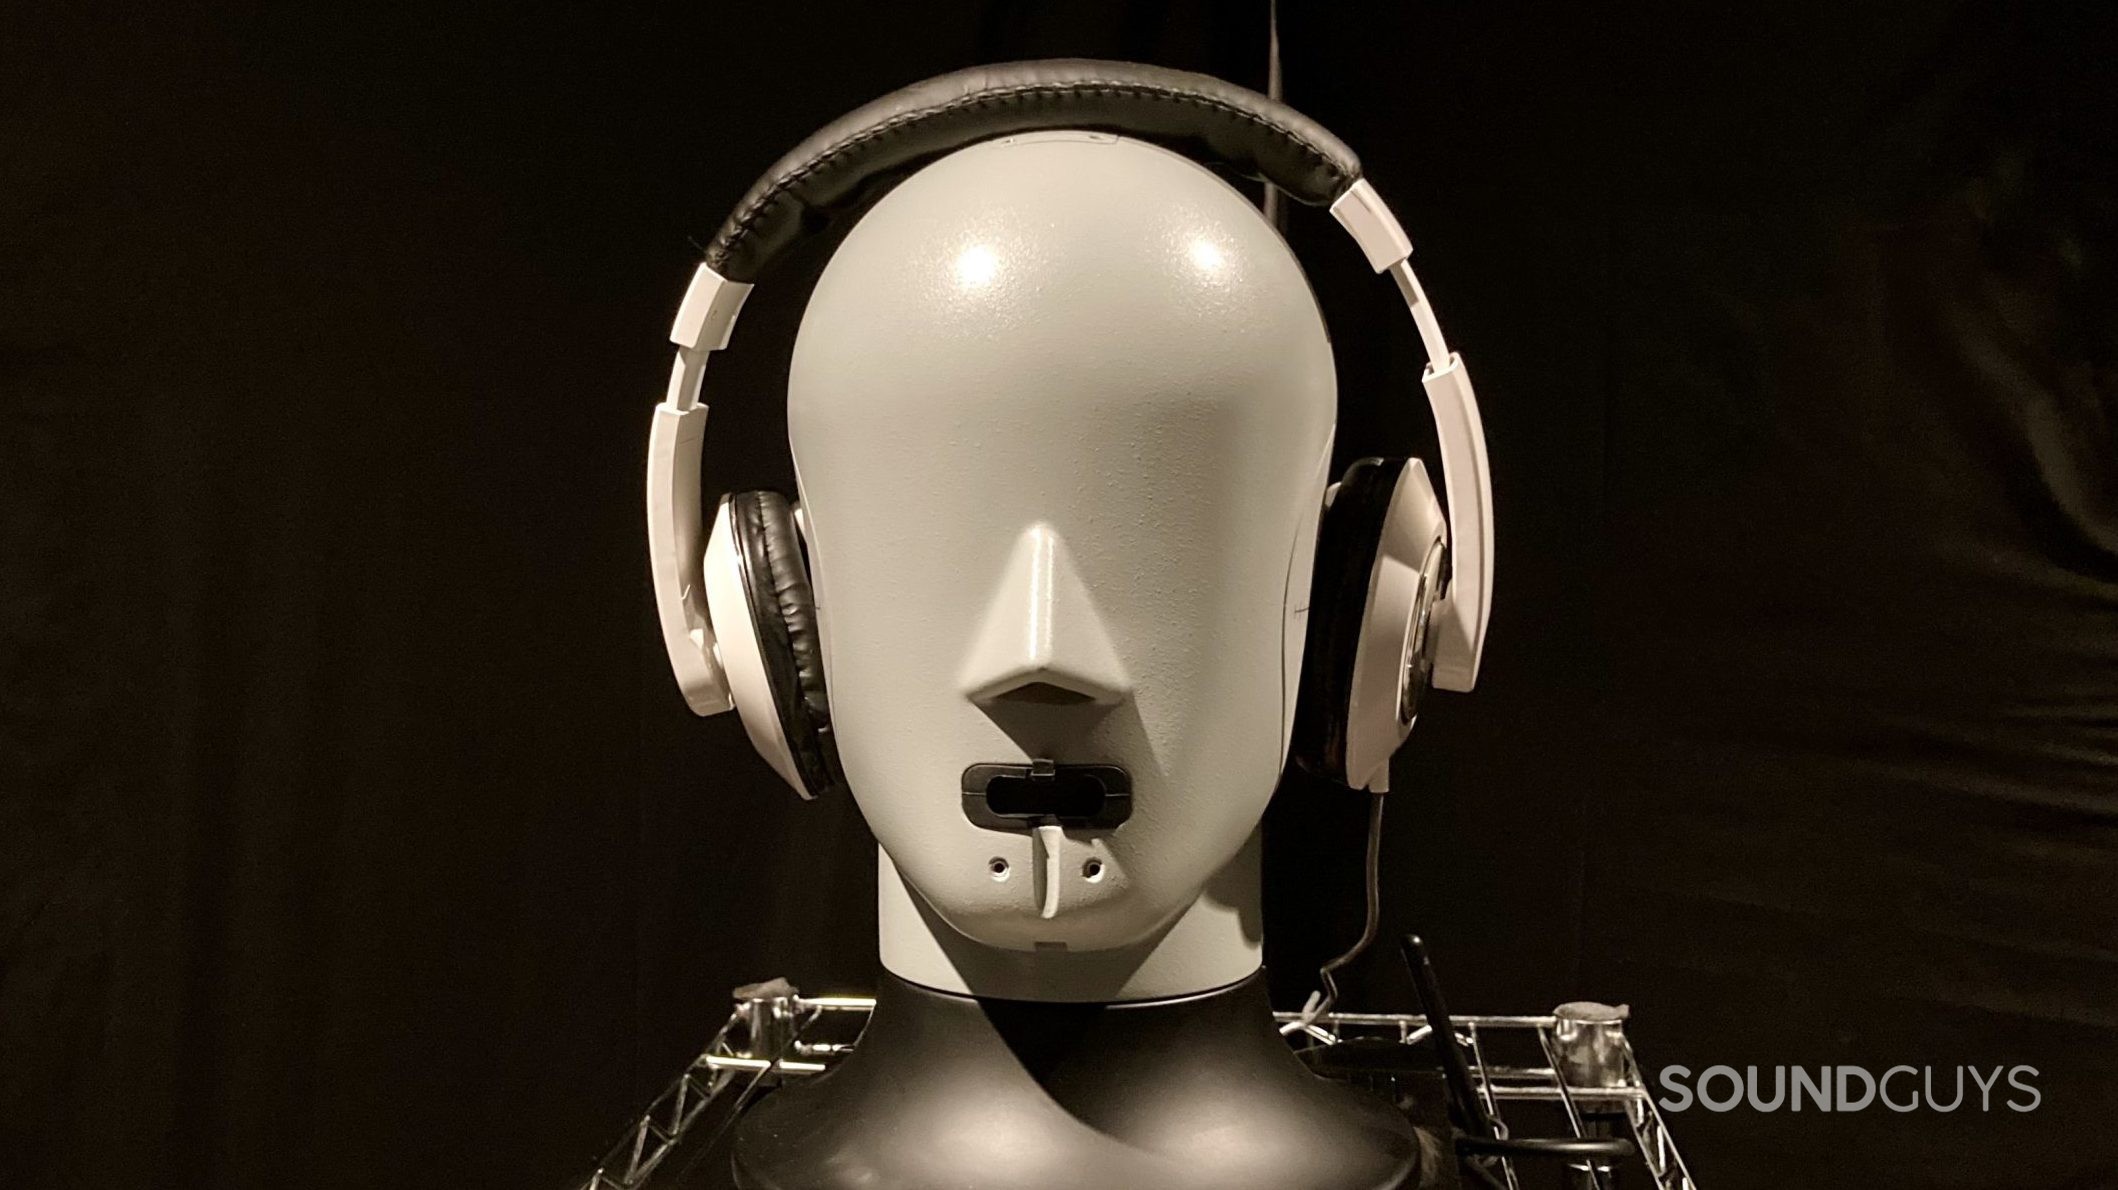 Electra Vortex headphones being tested on an artificial head